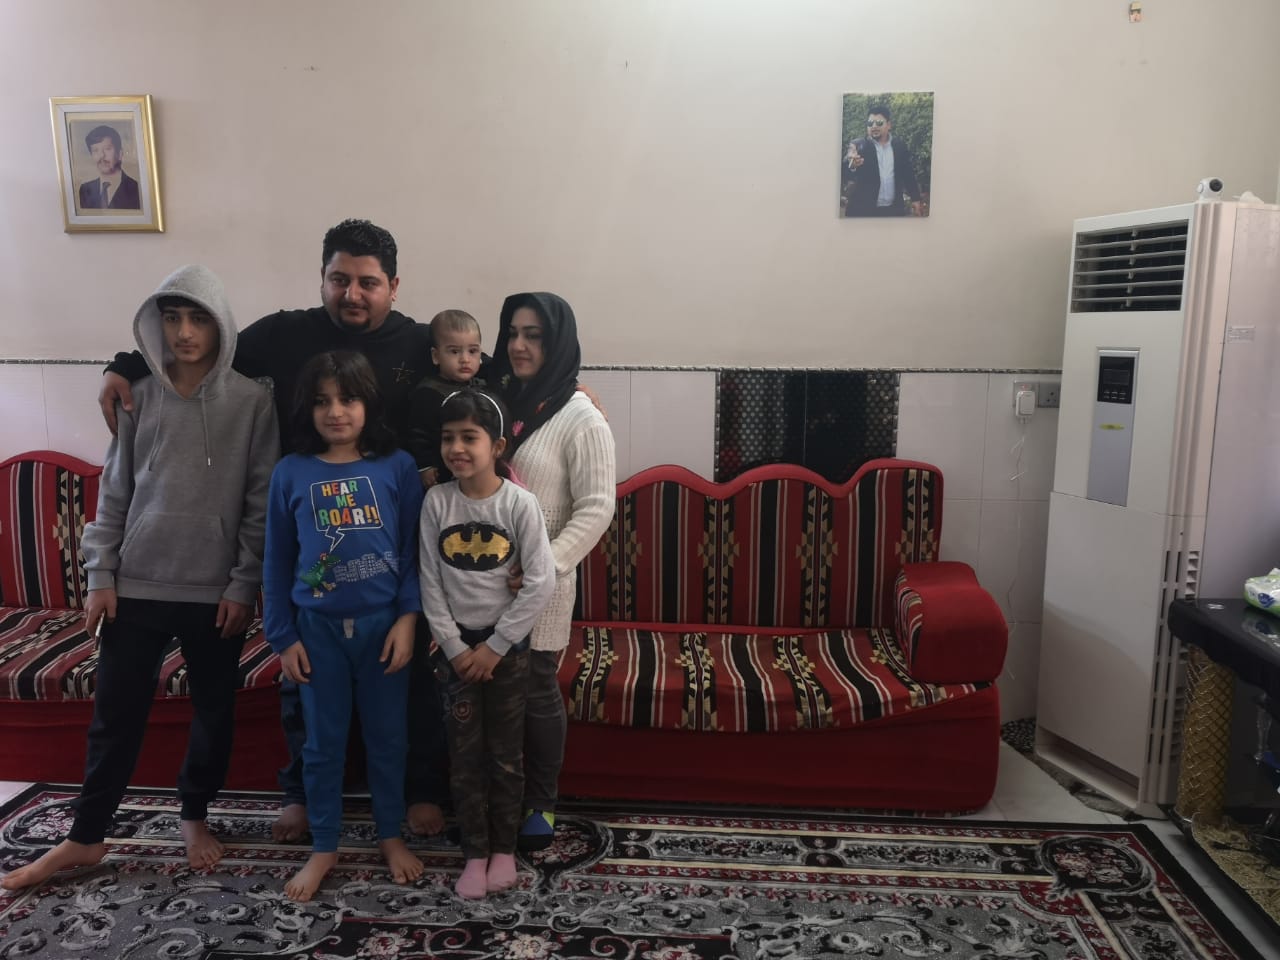 Hassanein Mohsen, his wife Nour and their four children in their home in Karbala. Hassanein is desperate to leave Iraq, where he says corruption has worn down public services so much that his homeland is no longer a safe place to raise his children.